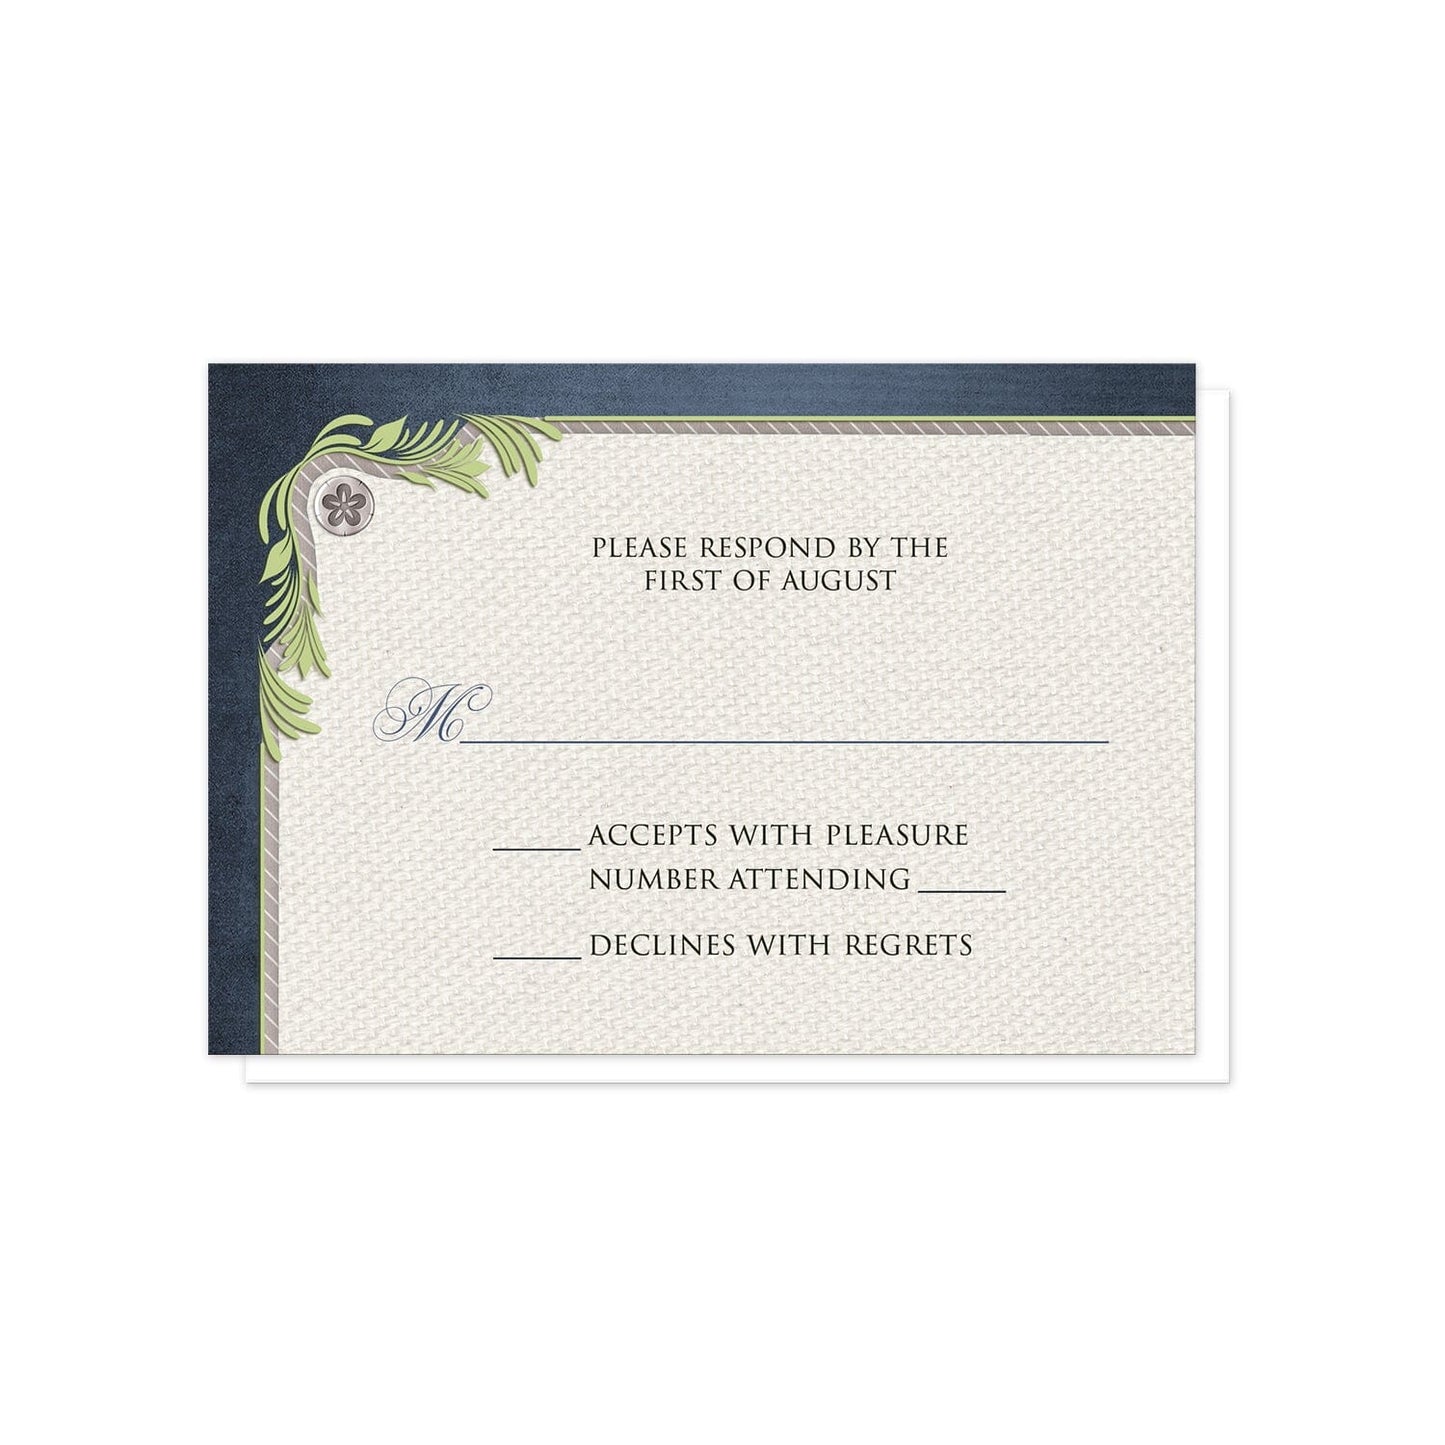 Rustic Succulent Garden Navy RSVP Cards at Artistically Invited.